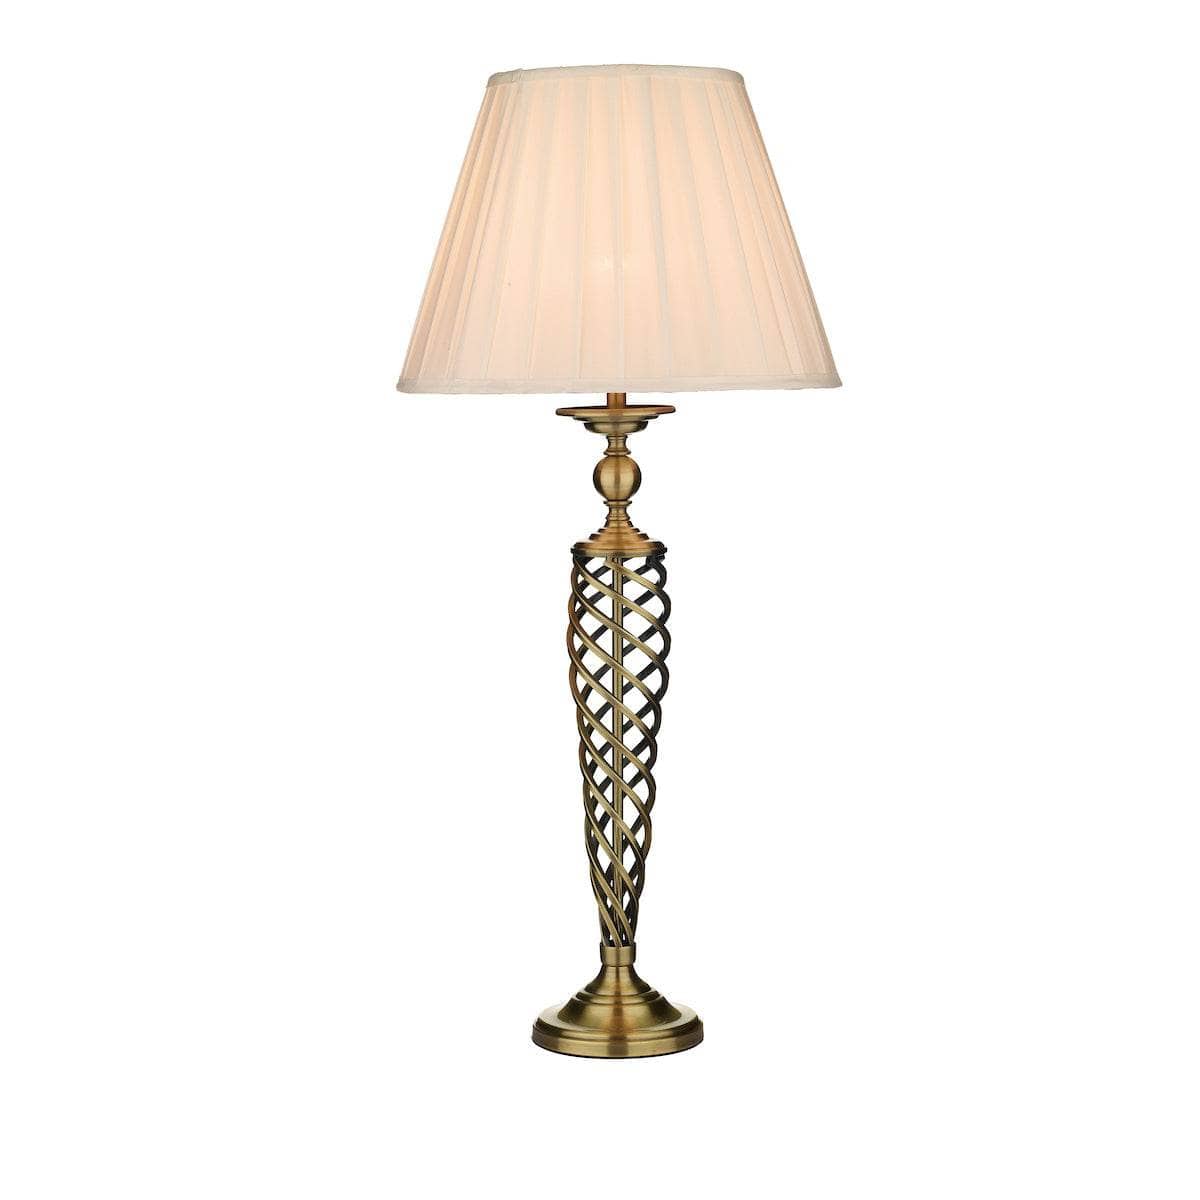 Lights  -  Zaragoza Table Lamp Complete With Shade Antique Brass  -  50085214